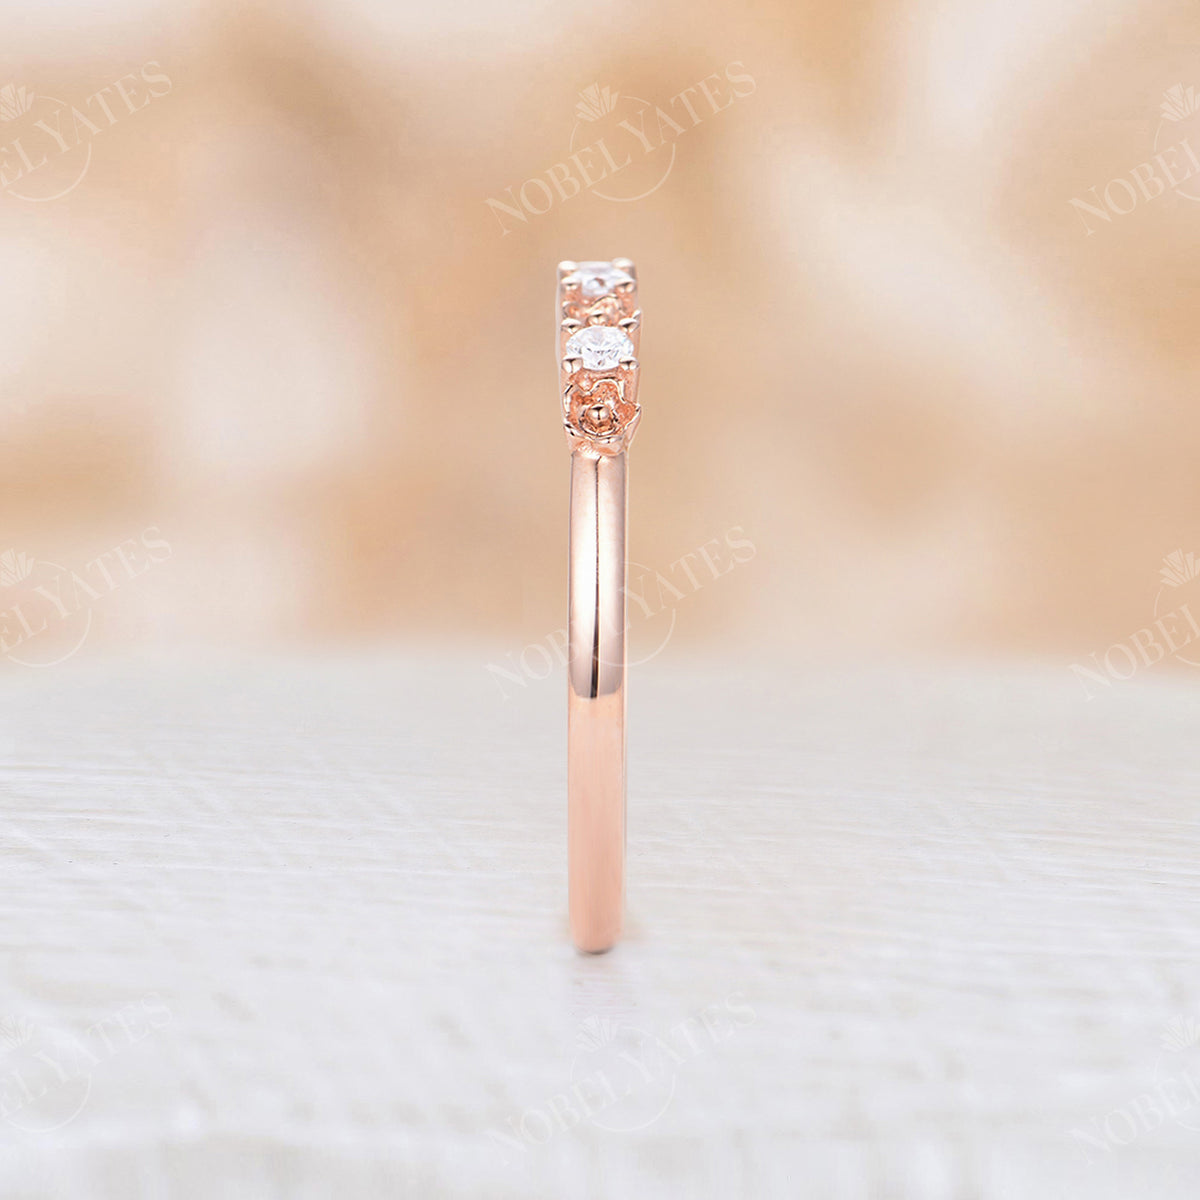 Natural Inspired Diamond Rose Gold Floral Wedding Band